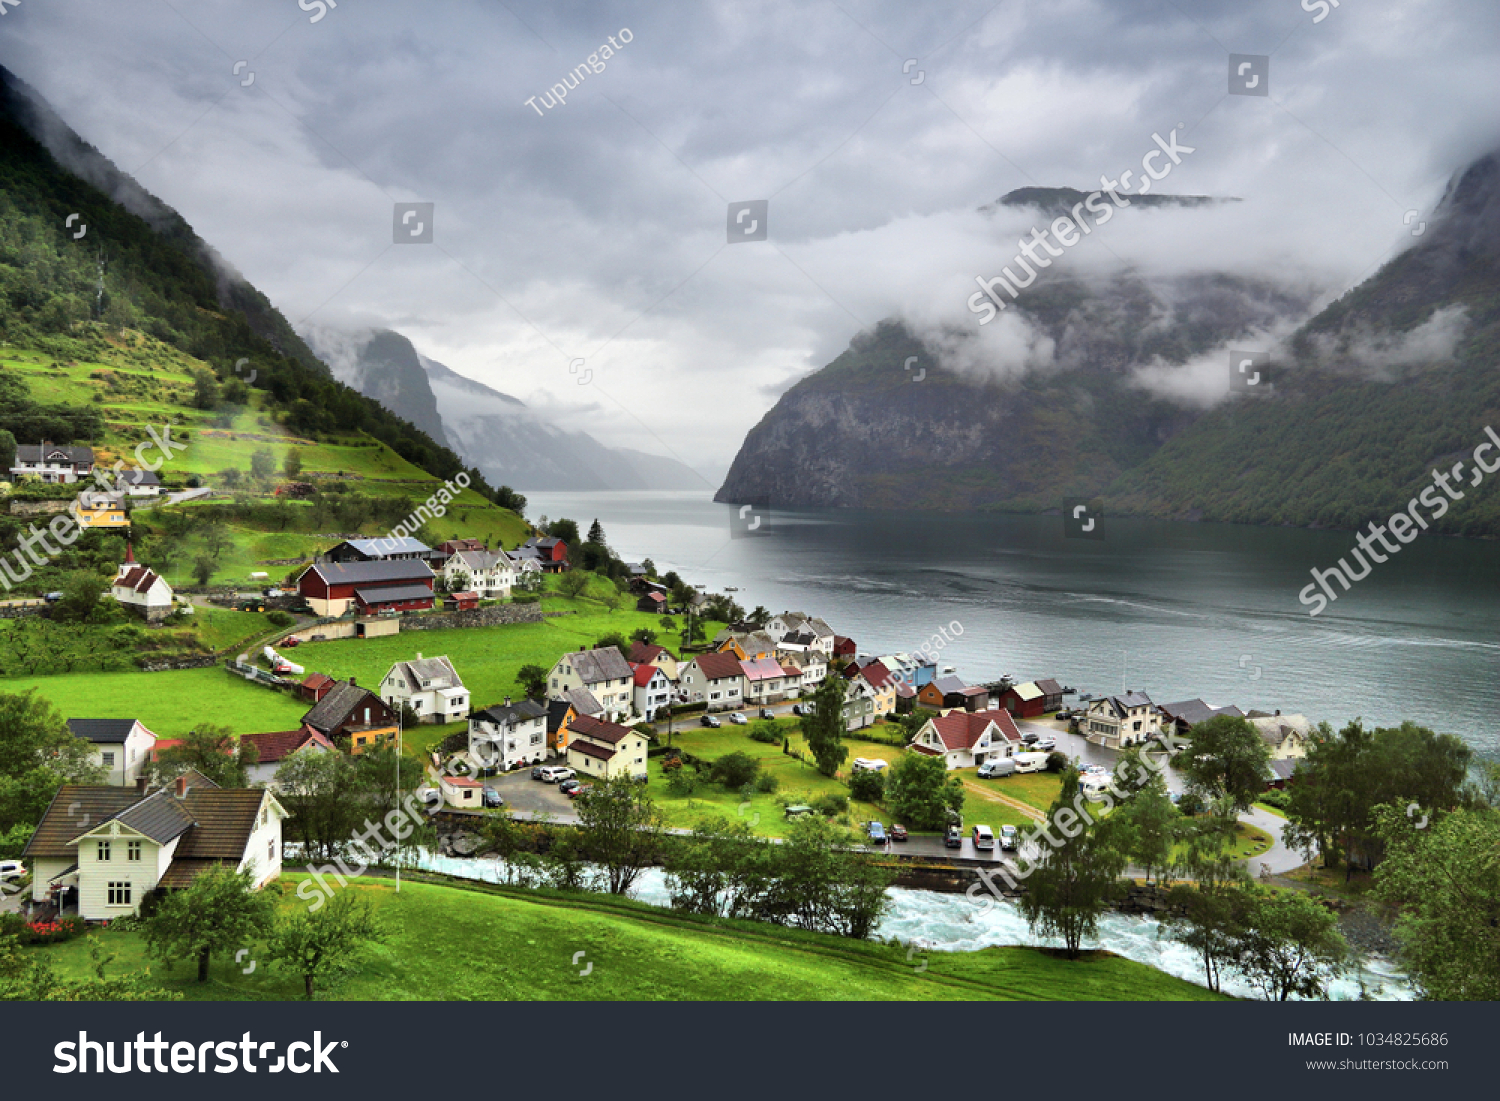 Norway fiord landscape - Aurlandsfjord, part of Sognefjord. Town of Undredal. #1034825686